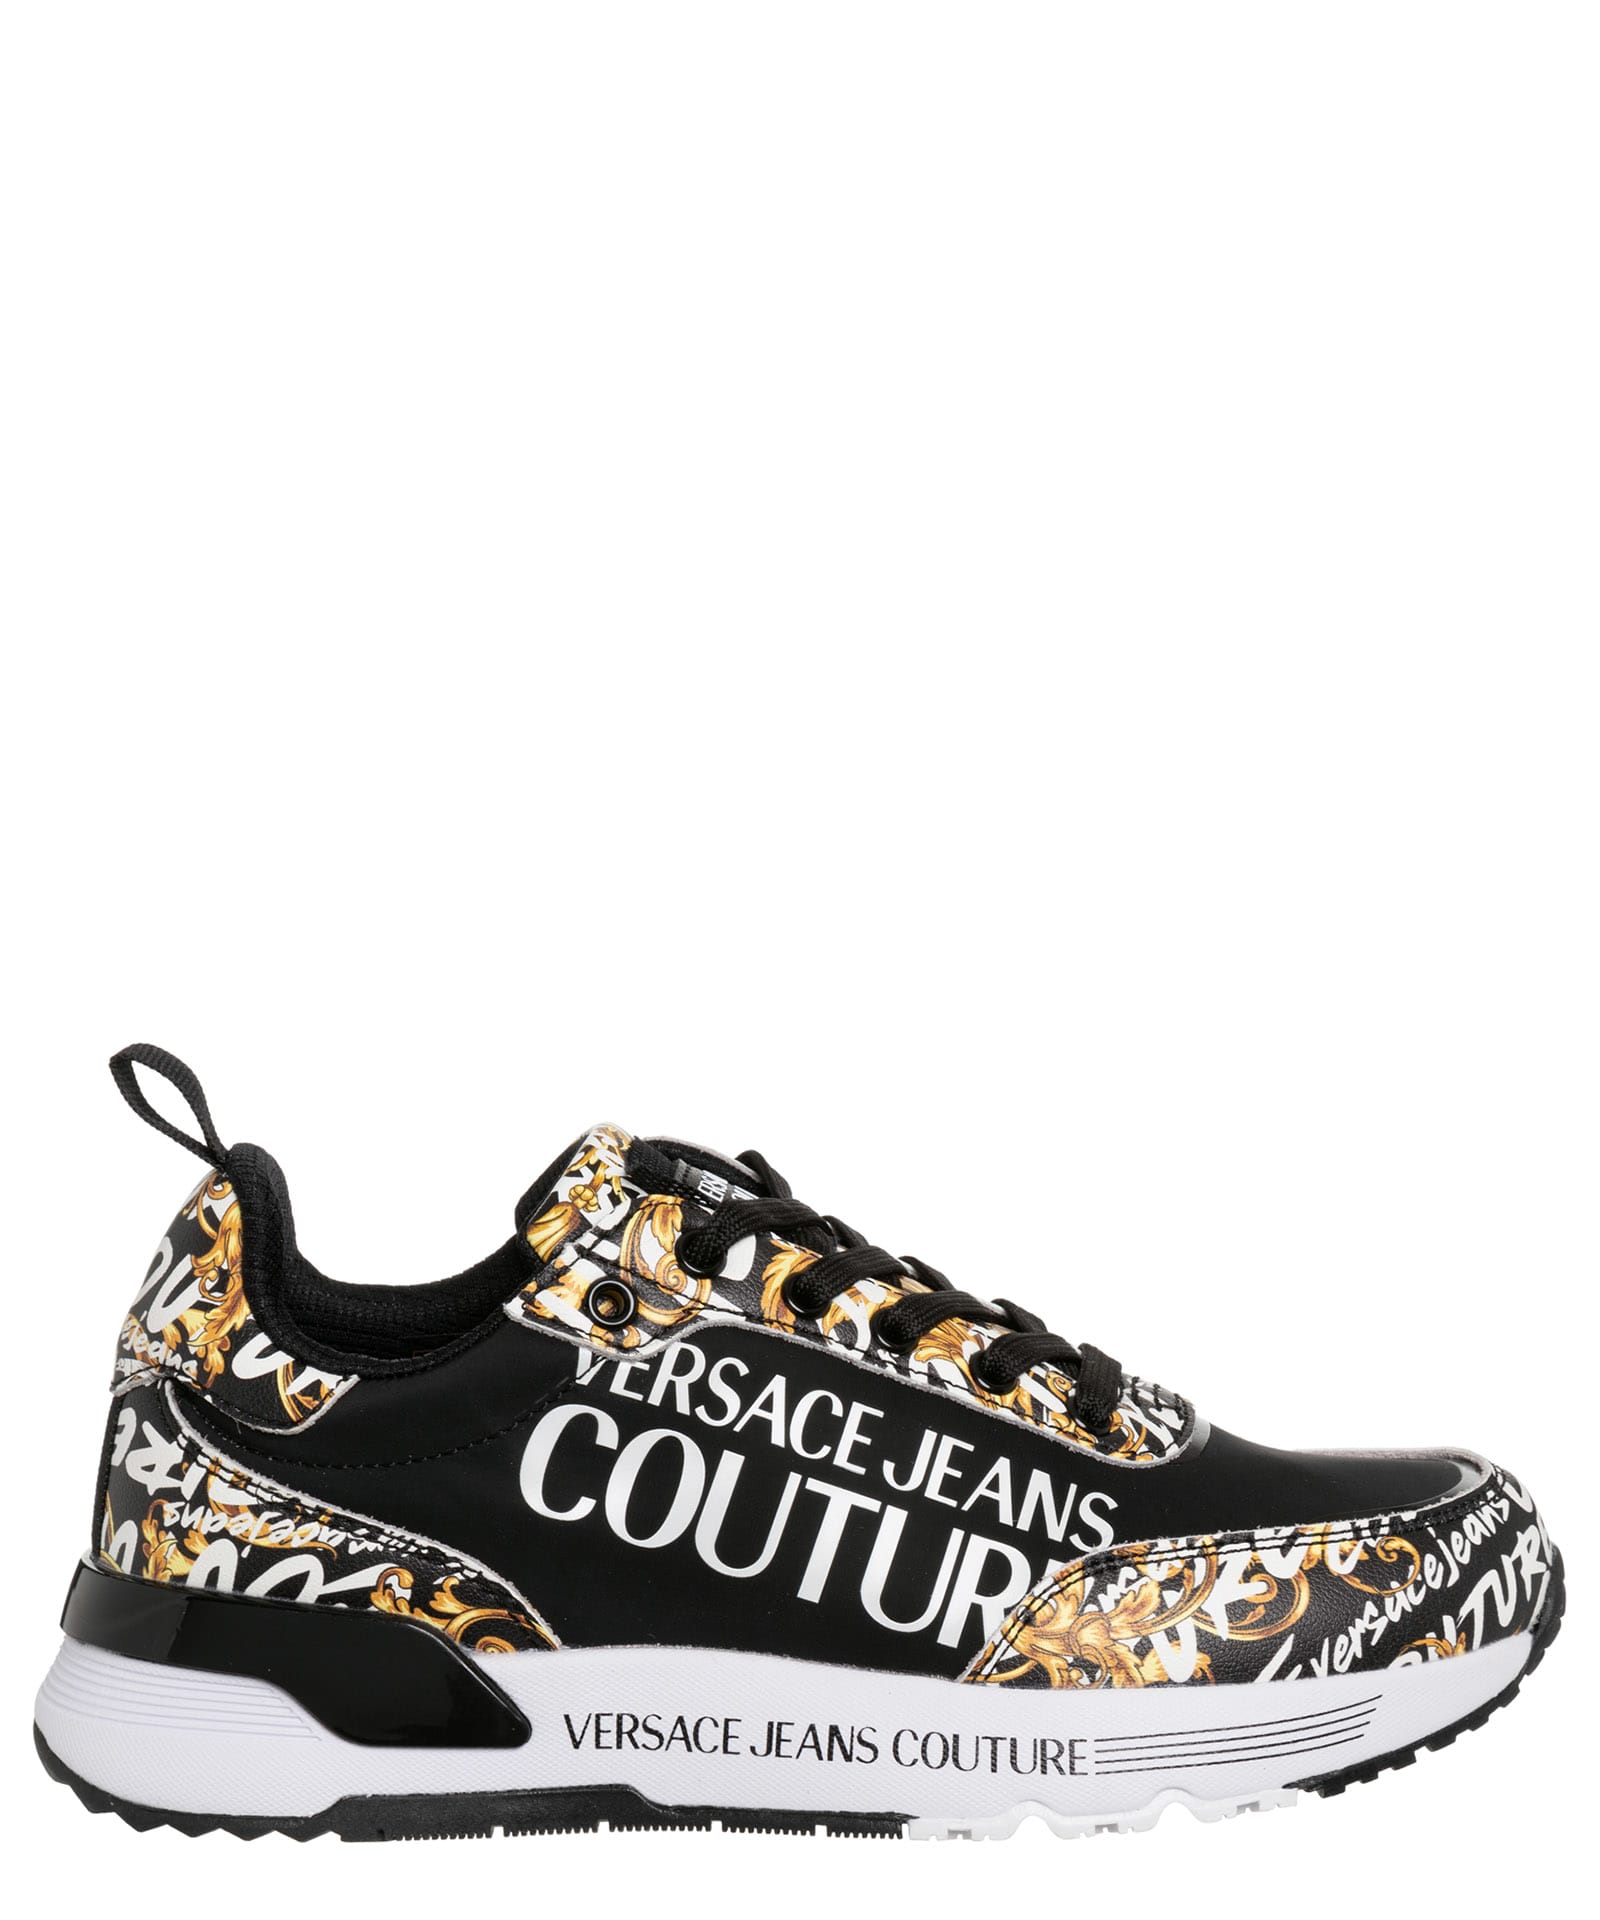 VERSACE JEANS COUTURE DYNAMIC LOGO BRUSH COUTURE LEATHER SNEAKERS